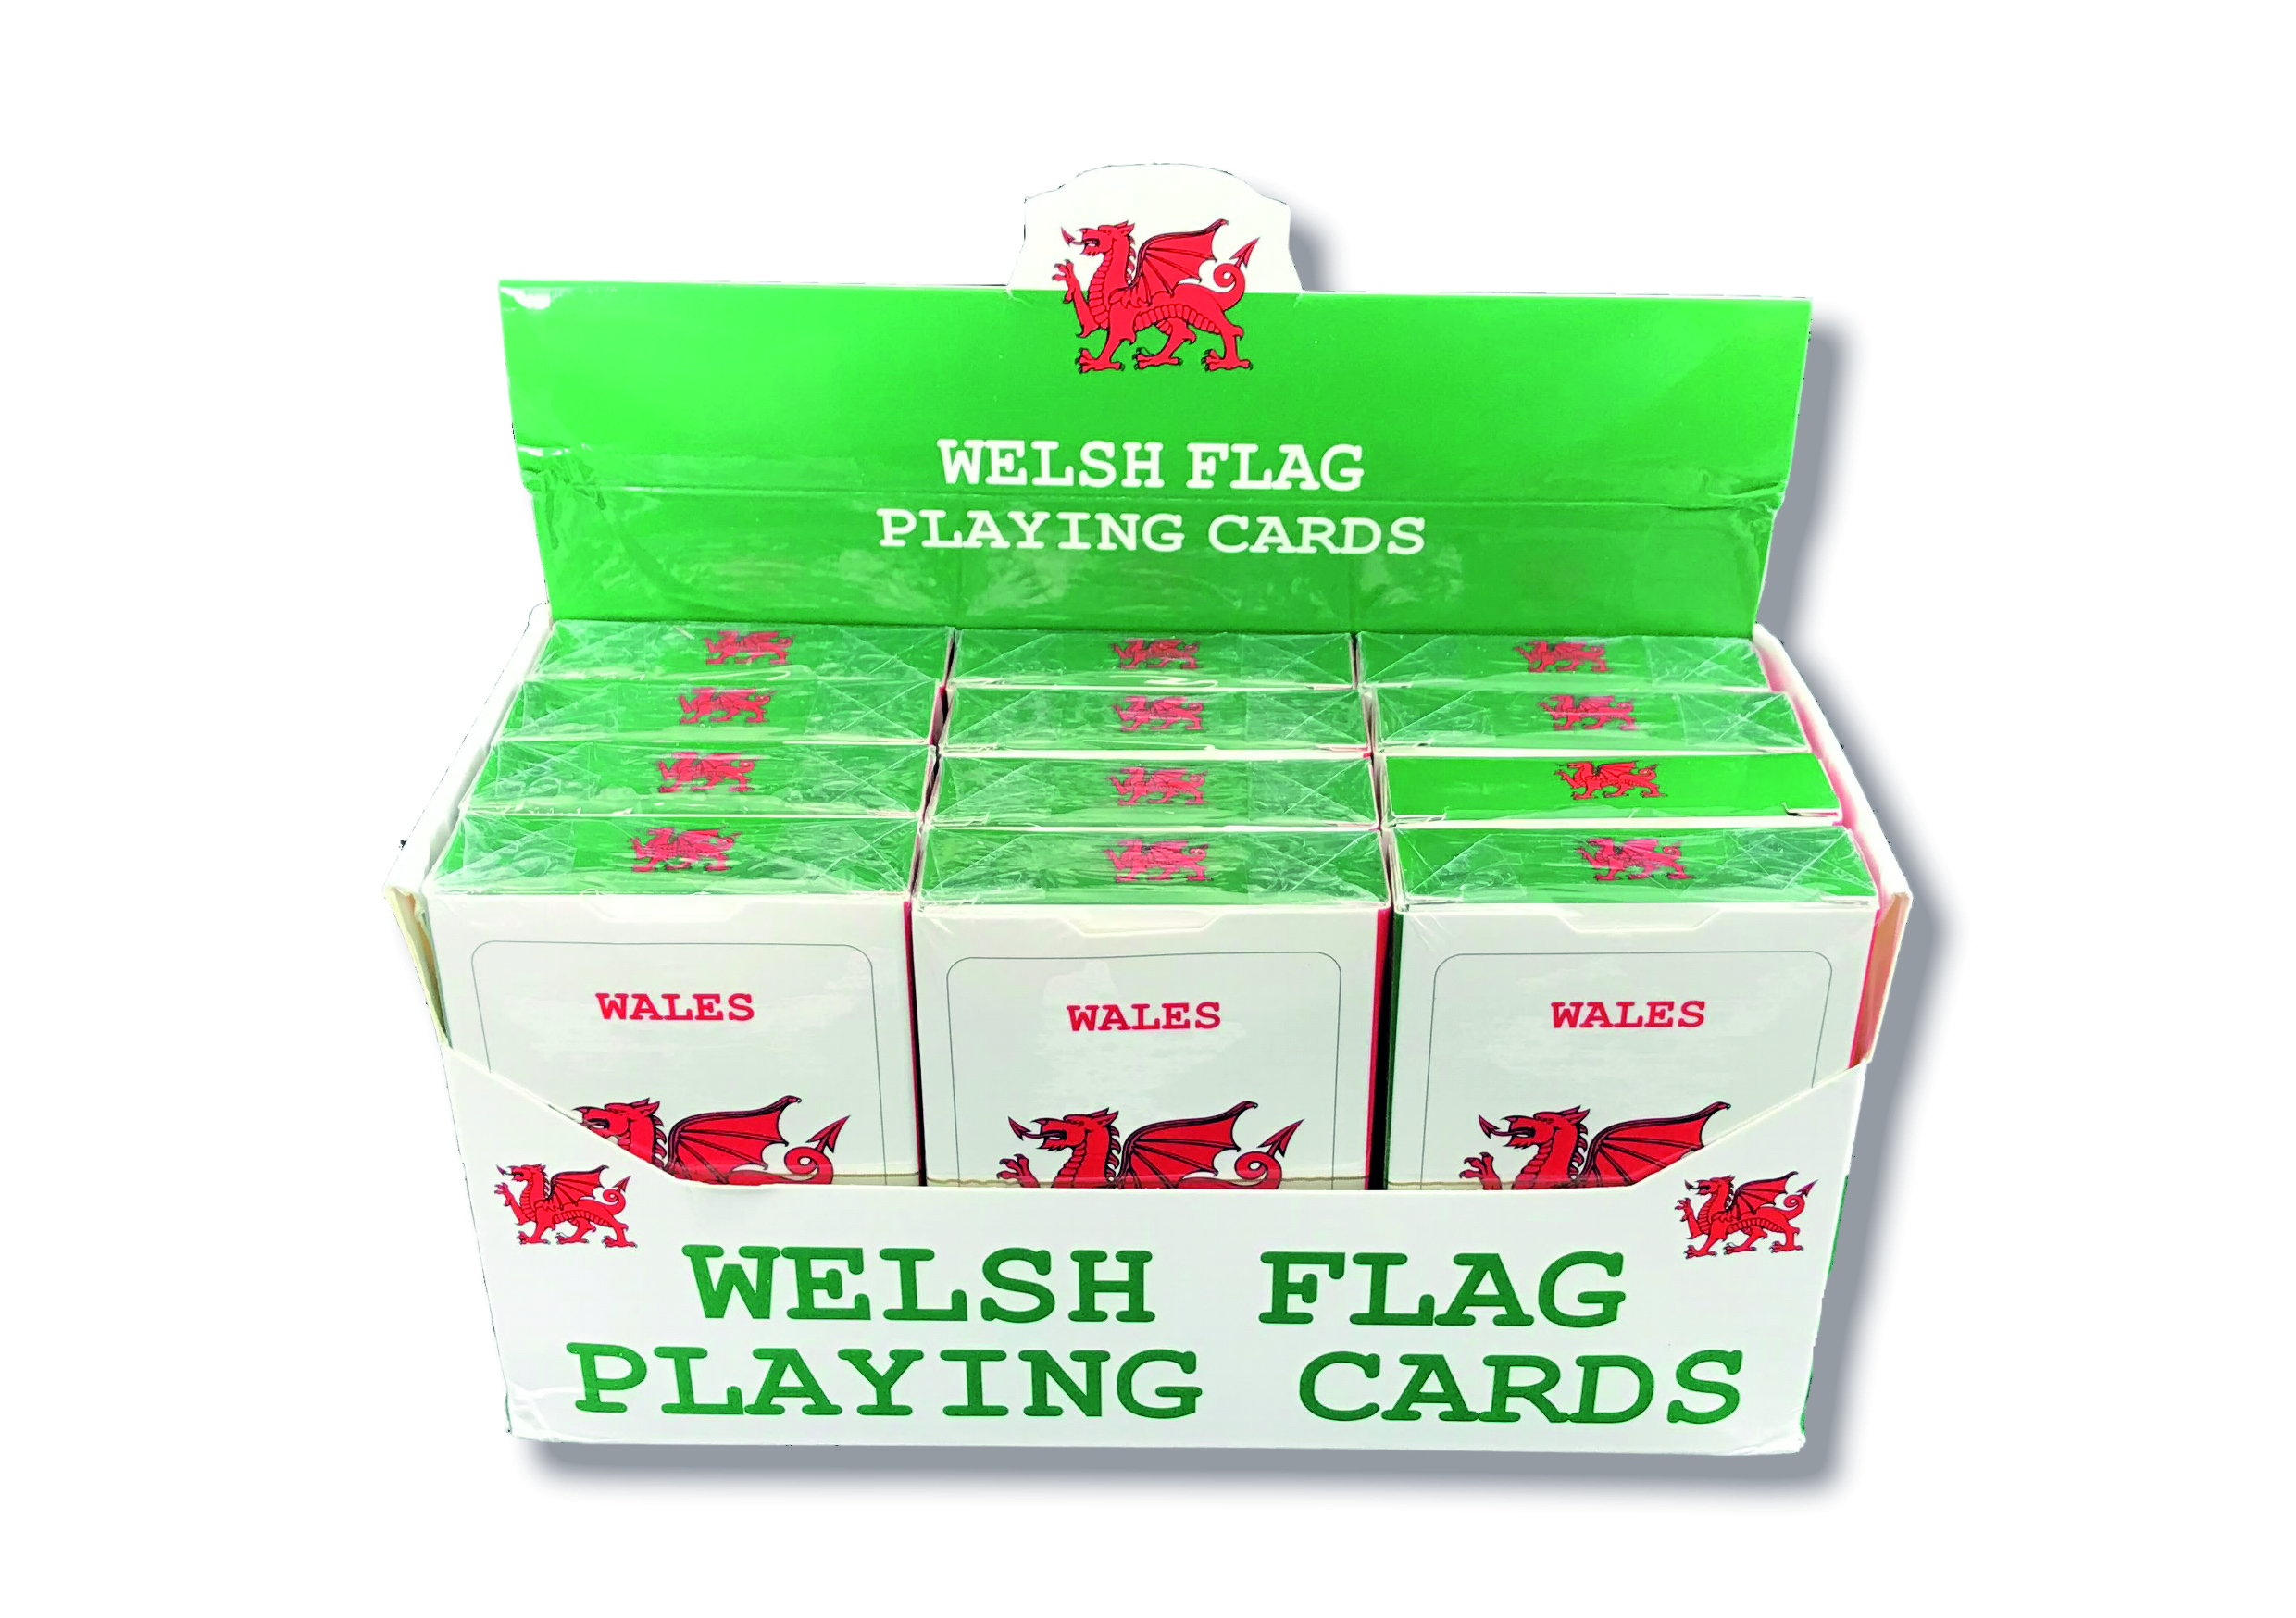 Welsh Flag Playing Cards in display box